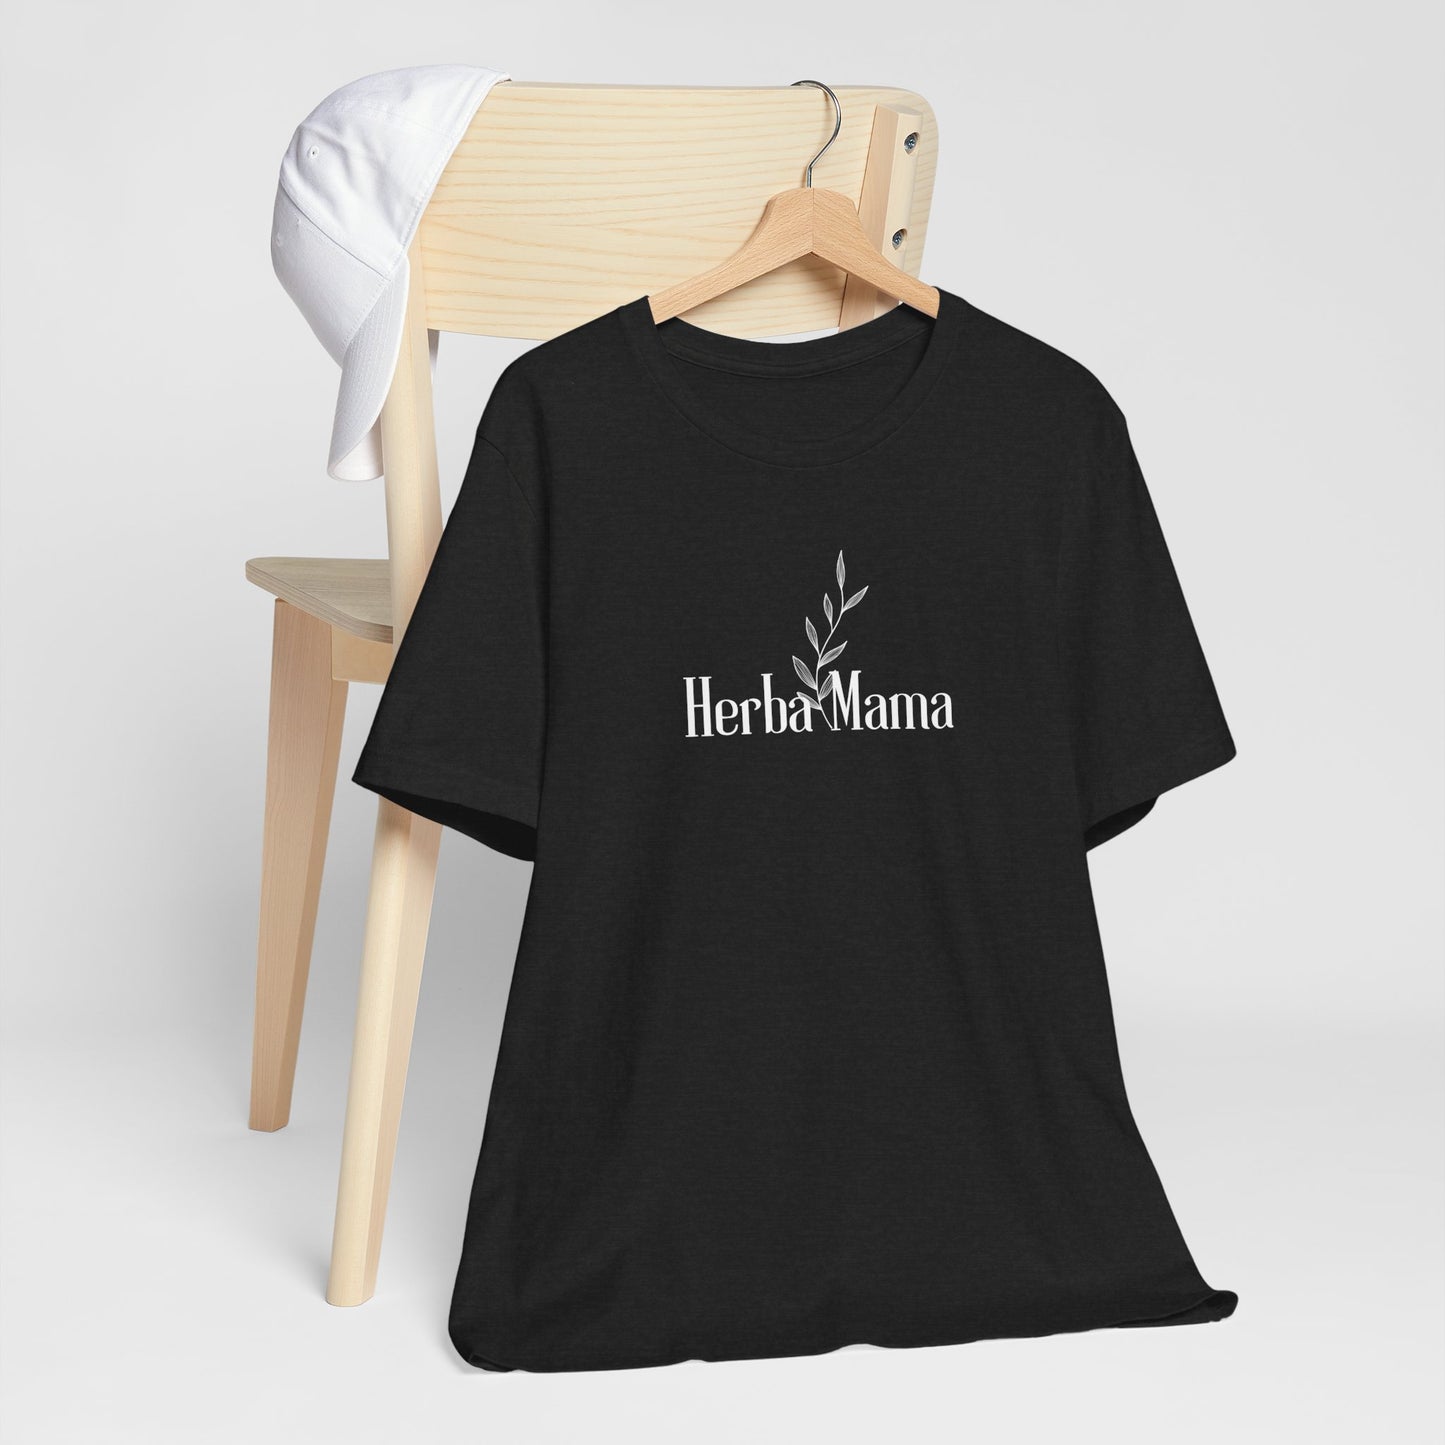 Herbal Mama Floral T-shirt for Garden Lovers, Unisex Jersey Short Sleeve Tee, Flower Shirt for Her